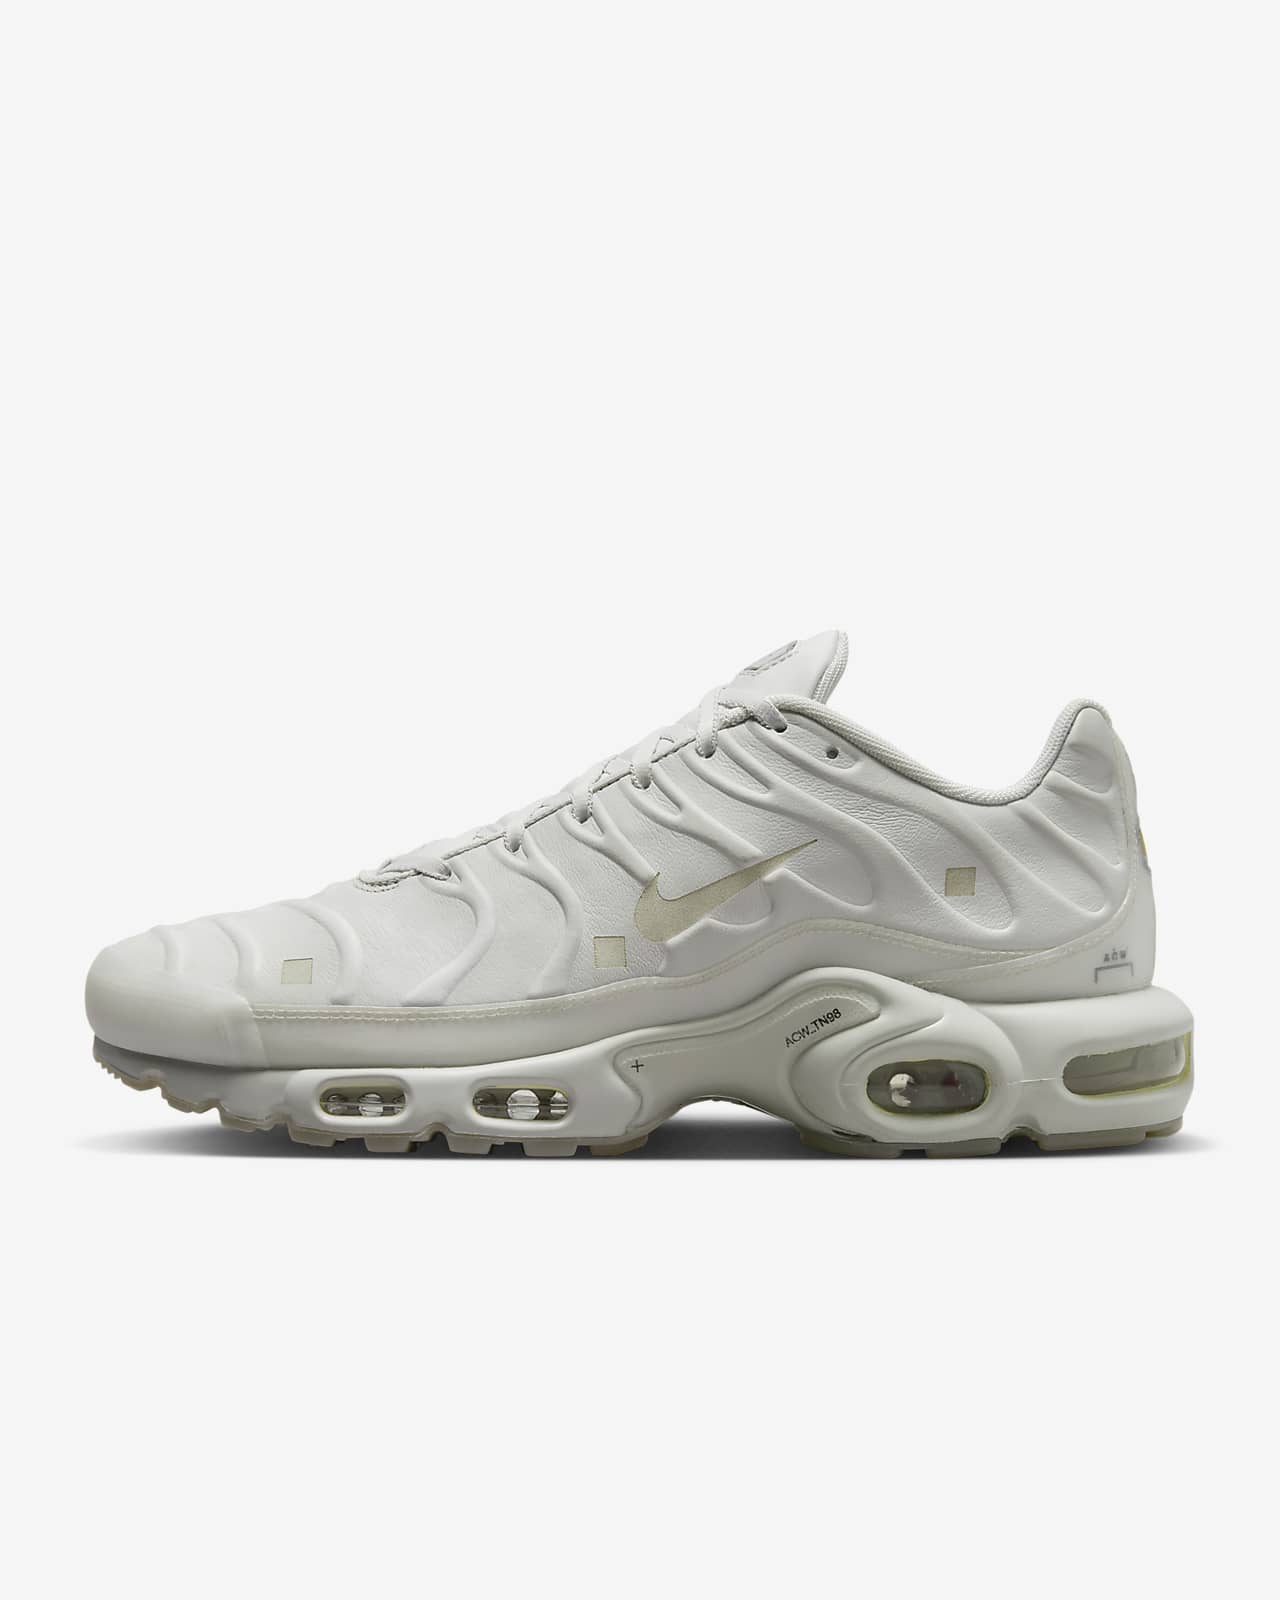 Nike Air Max Plus x A-COLD-WALL* Men's Shoes